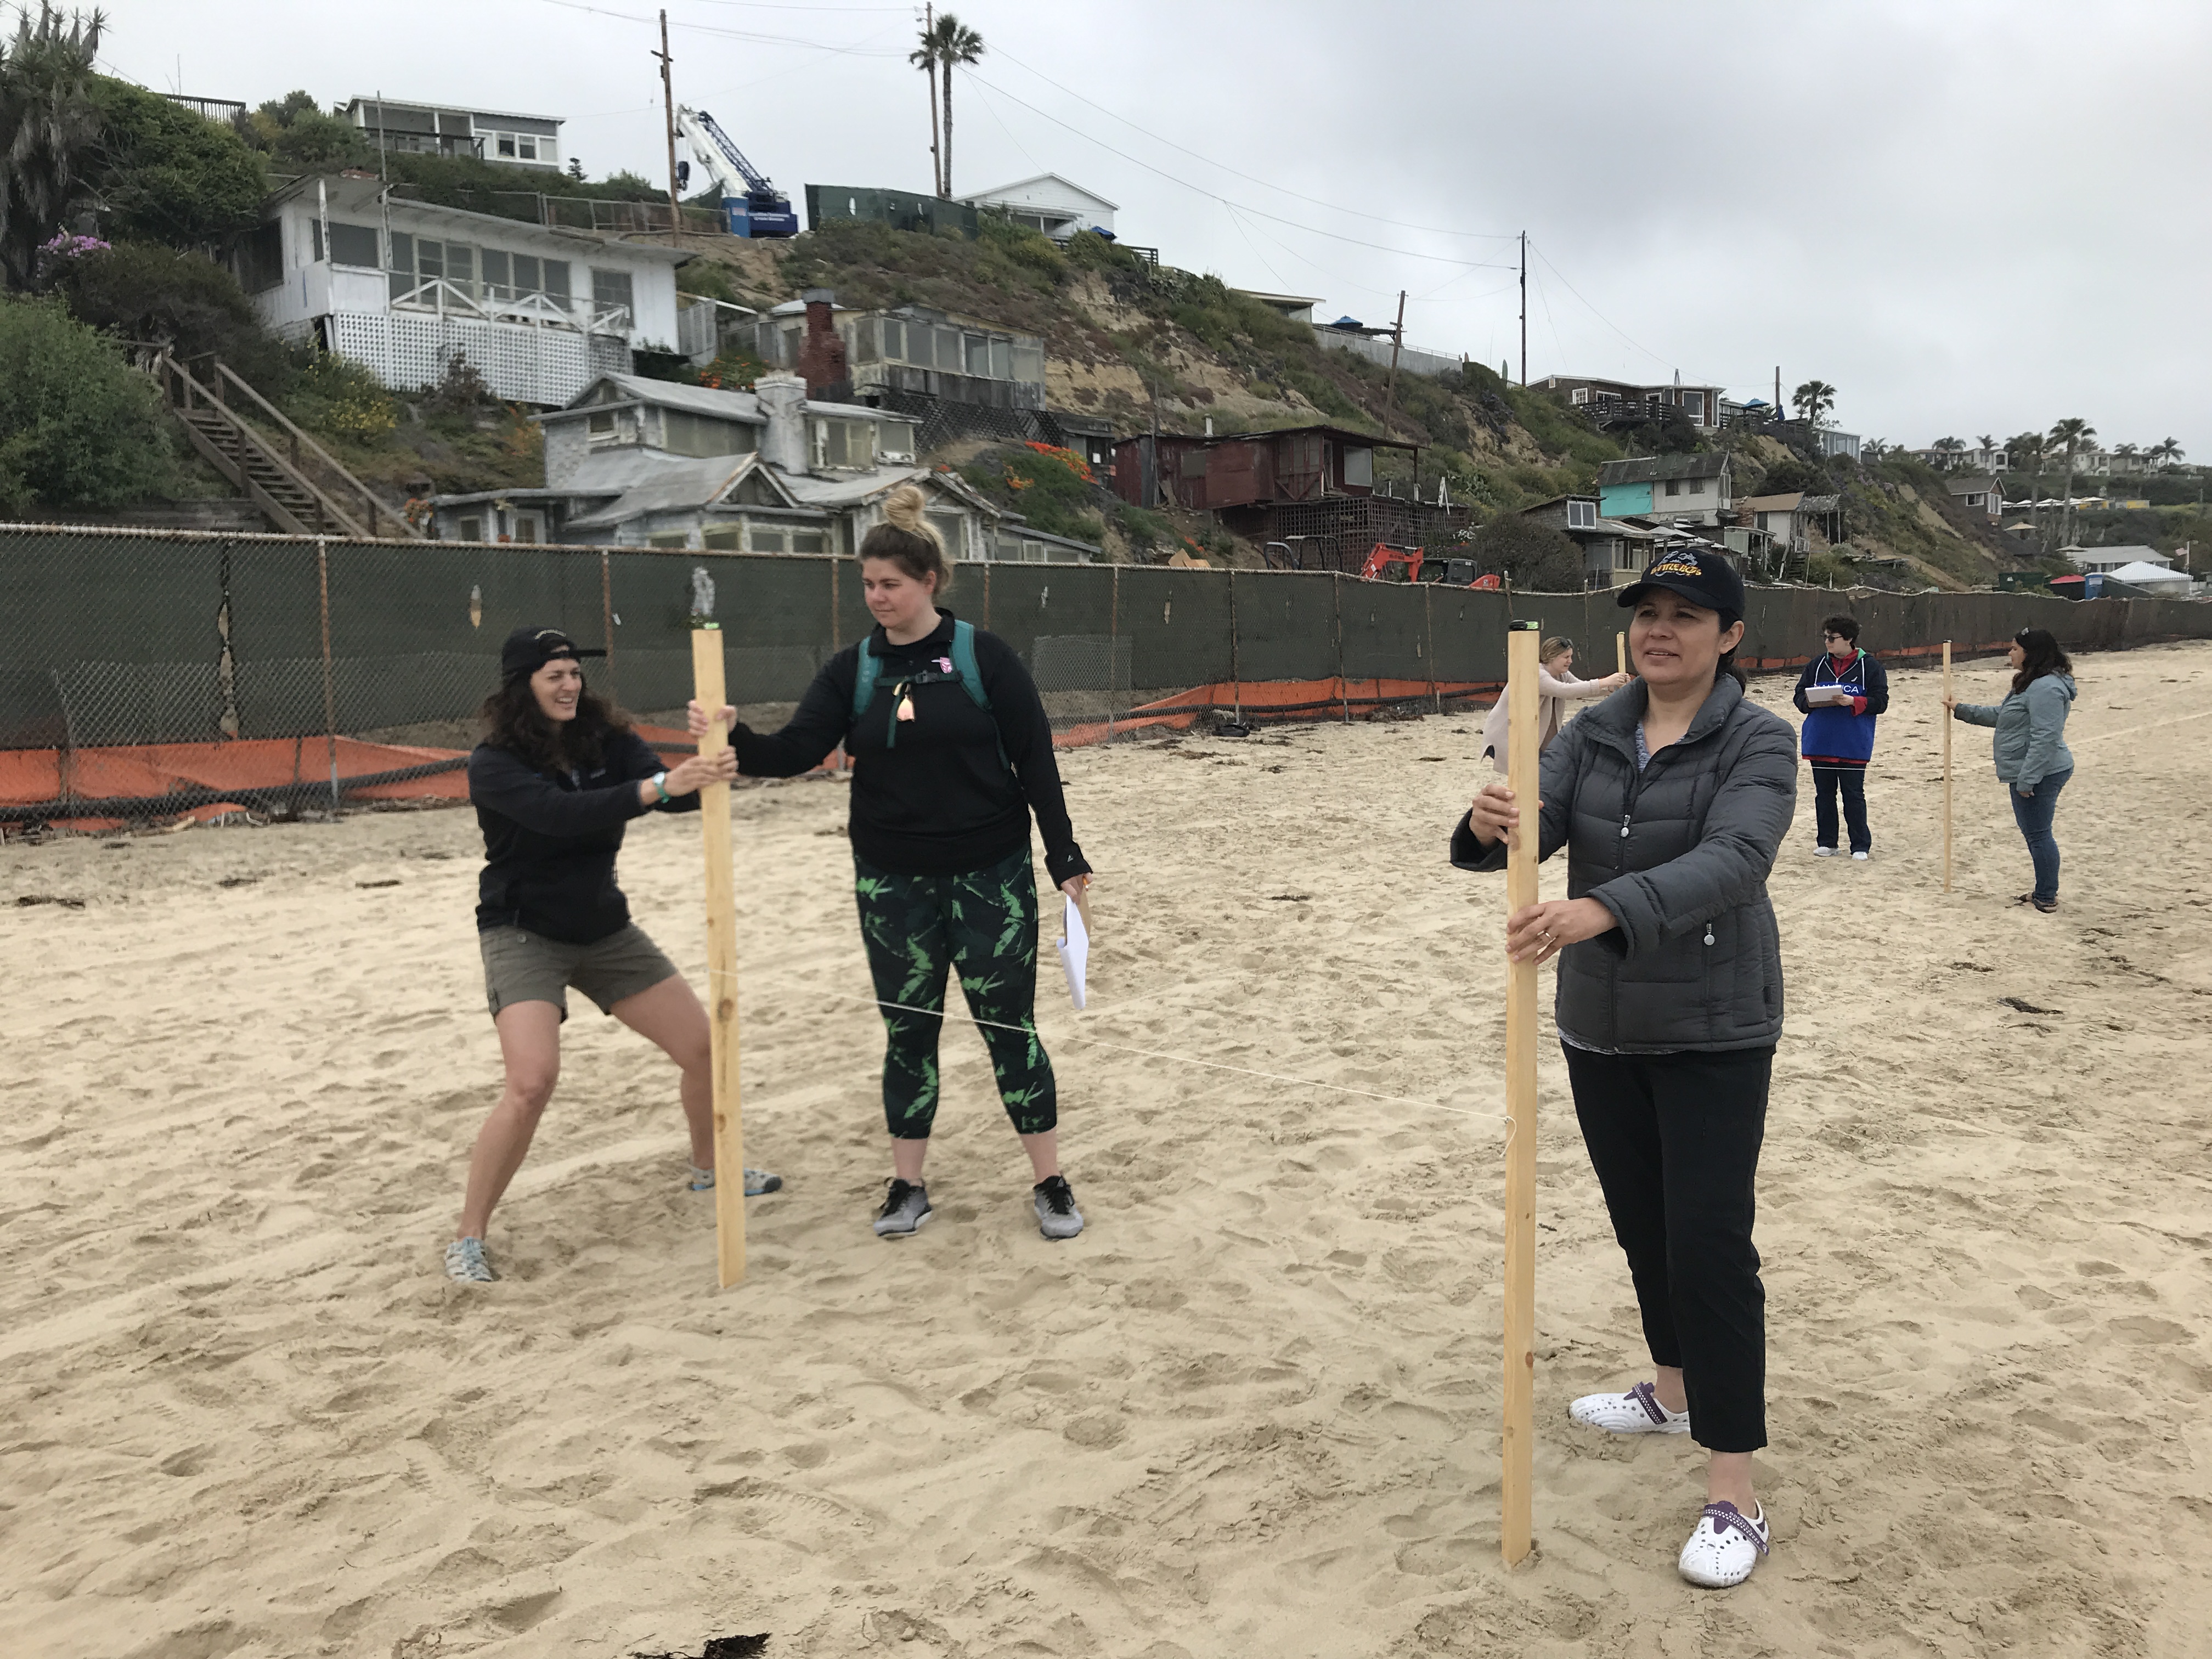 UCI students measure beach dynamics with an emery board